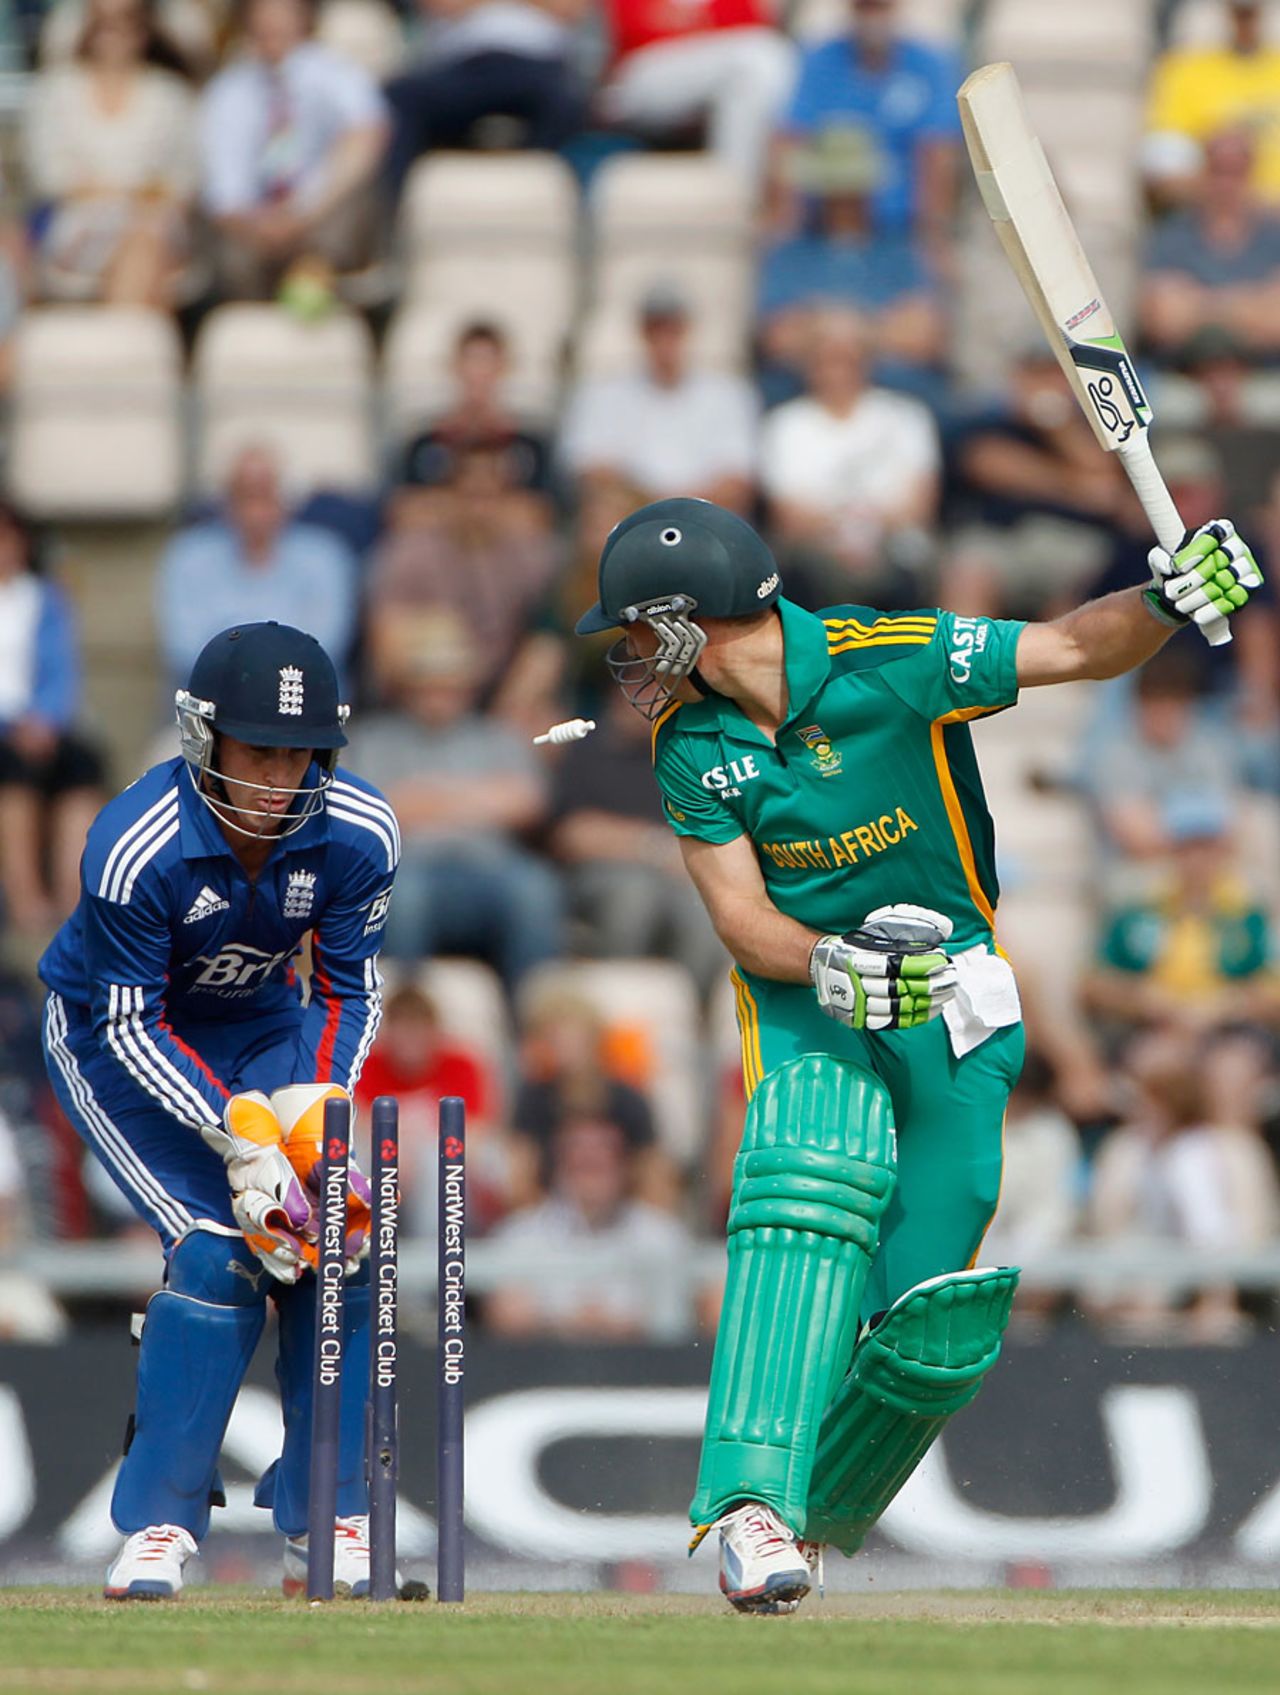 AB de Villiers was bowled by Graeme Swann, England v South Africa, 2nd NatWest ODI, West End, August 28, 2012